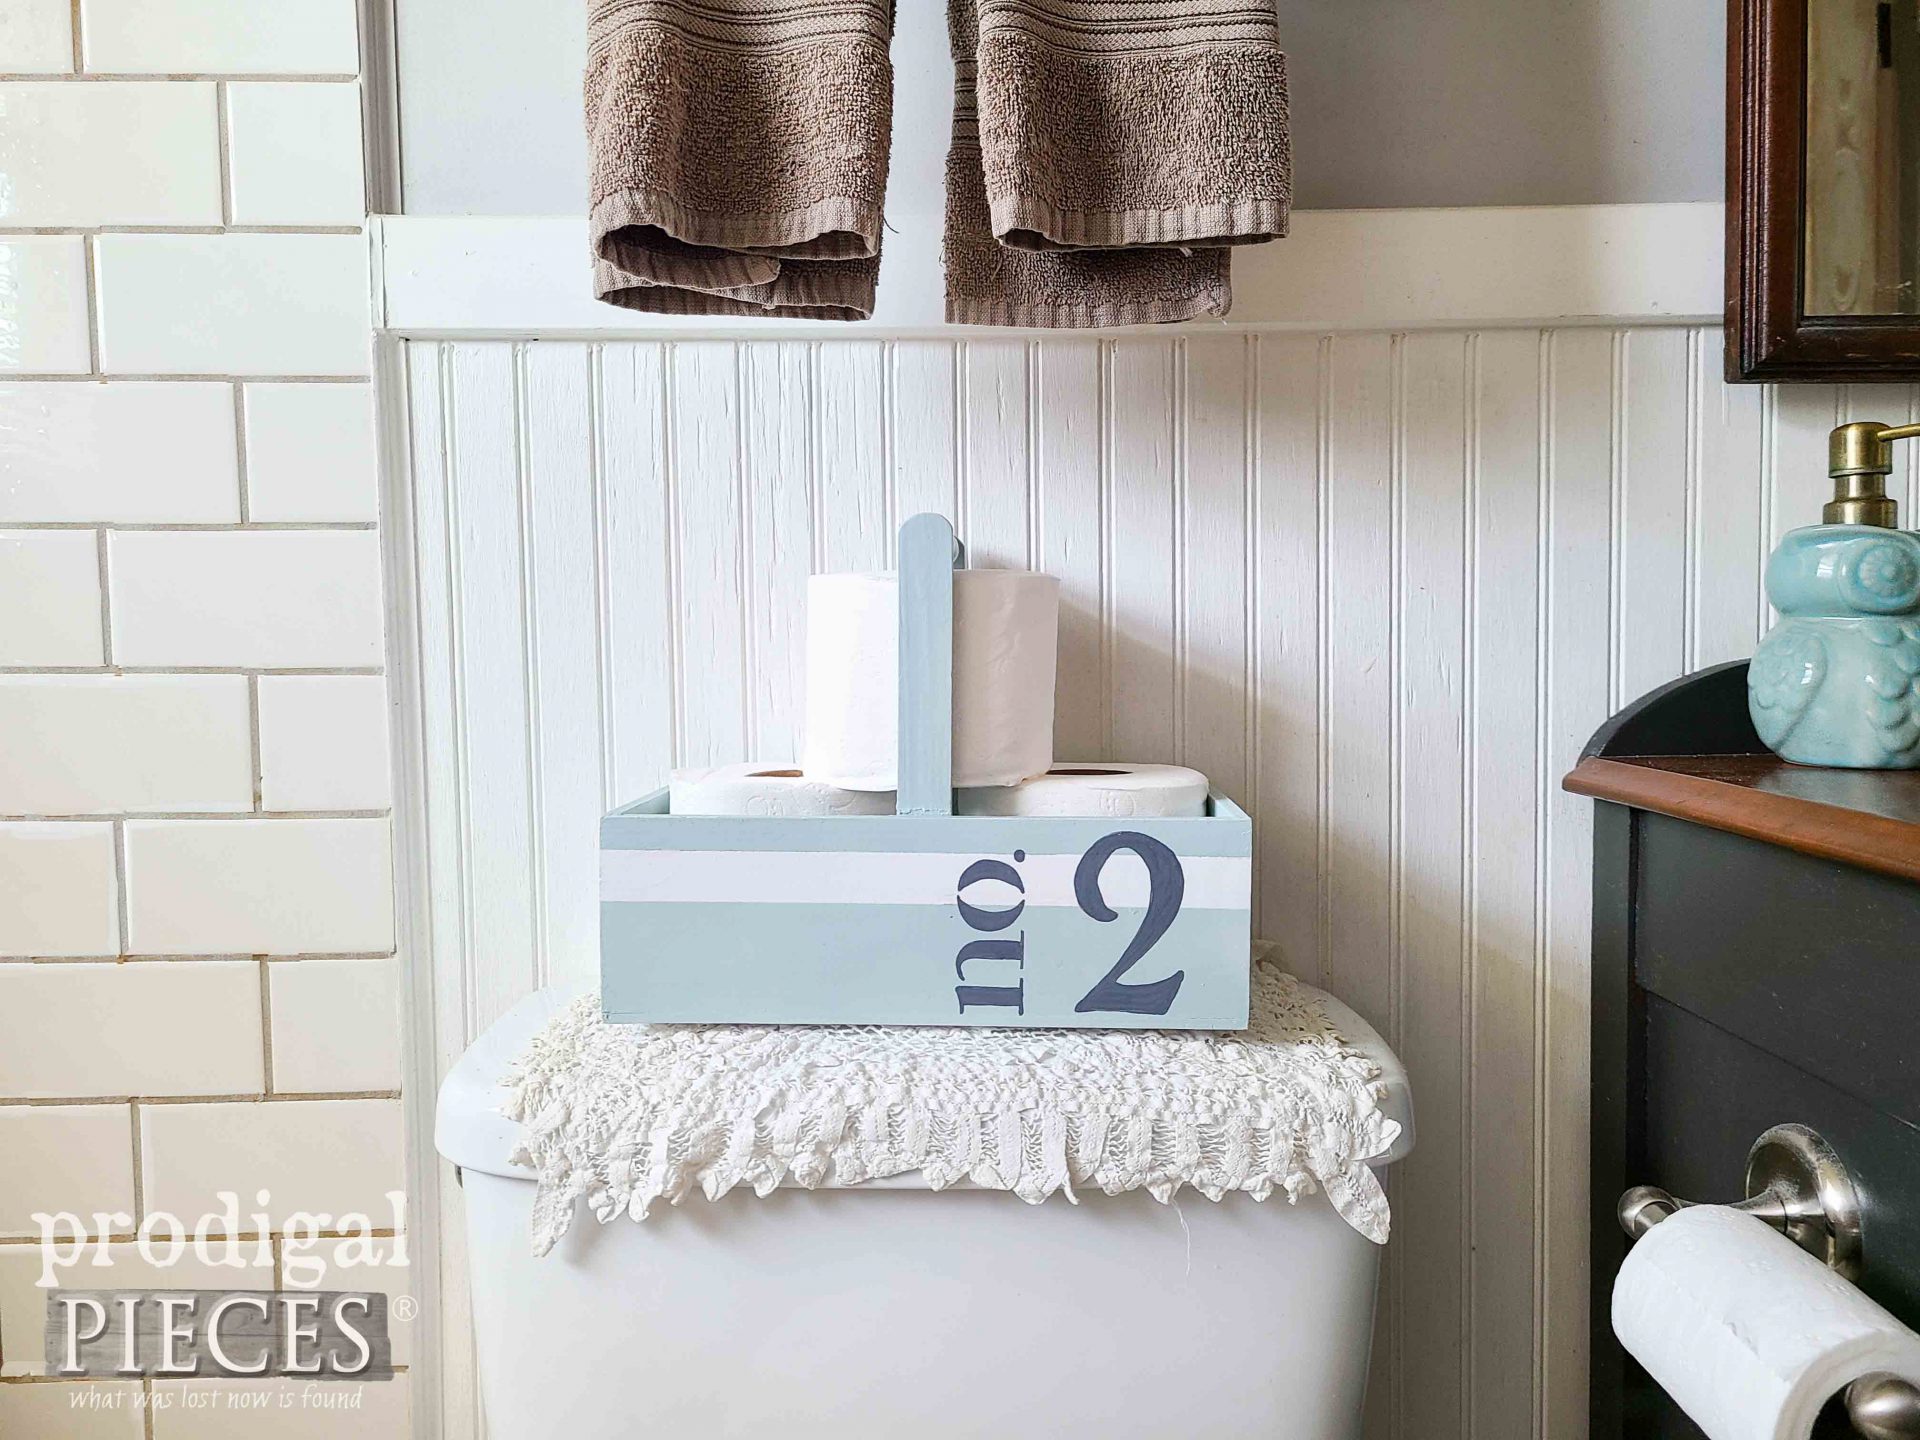 No. 2 Bathroom TP Holder for Farmhouse Totes Makeover by Larissa of Prodigal Pieces | prodigalpieces.com #prodigalpieces #farmhouse #bathroom #diy